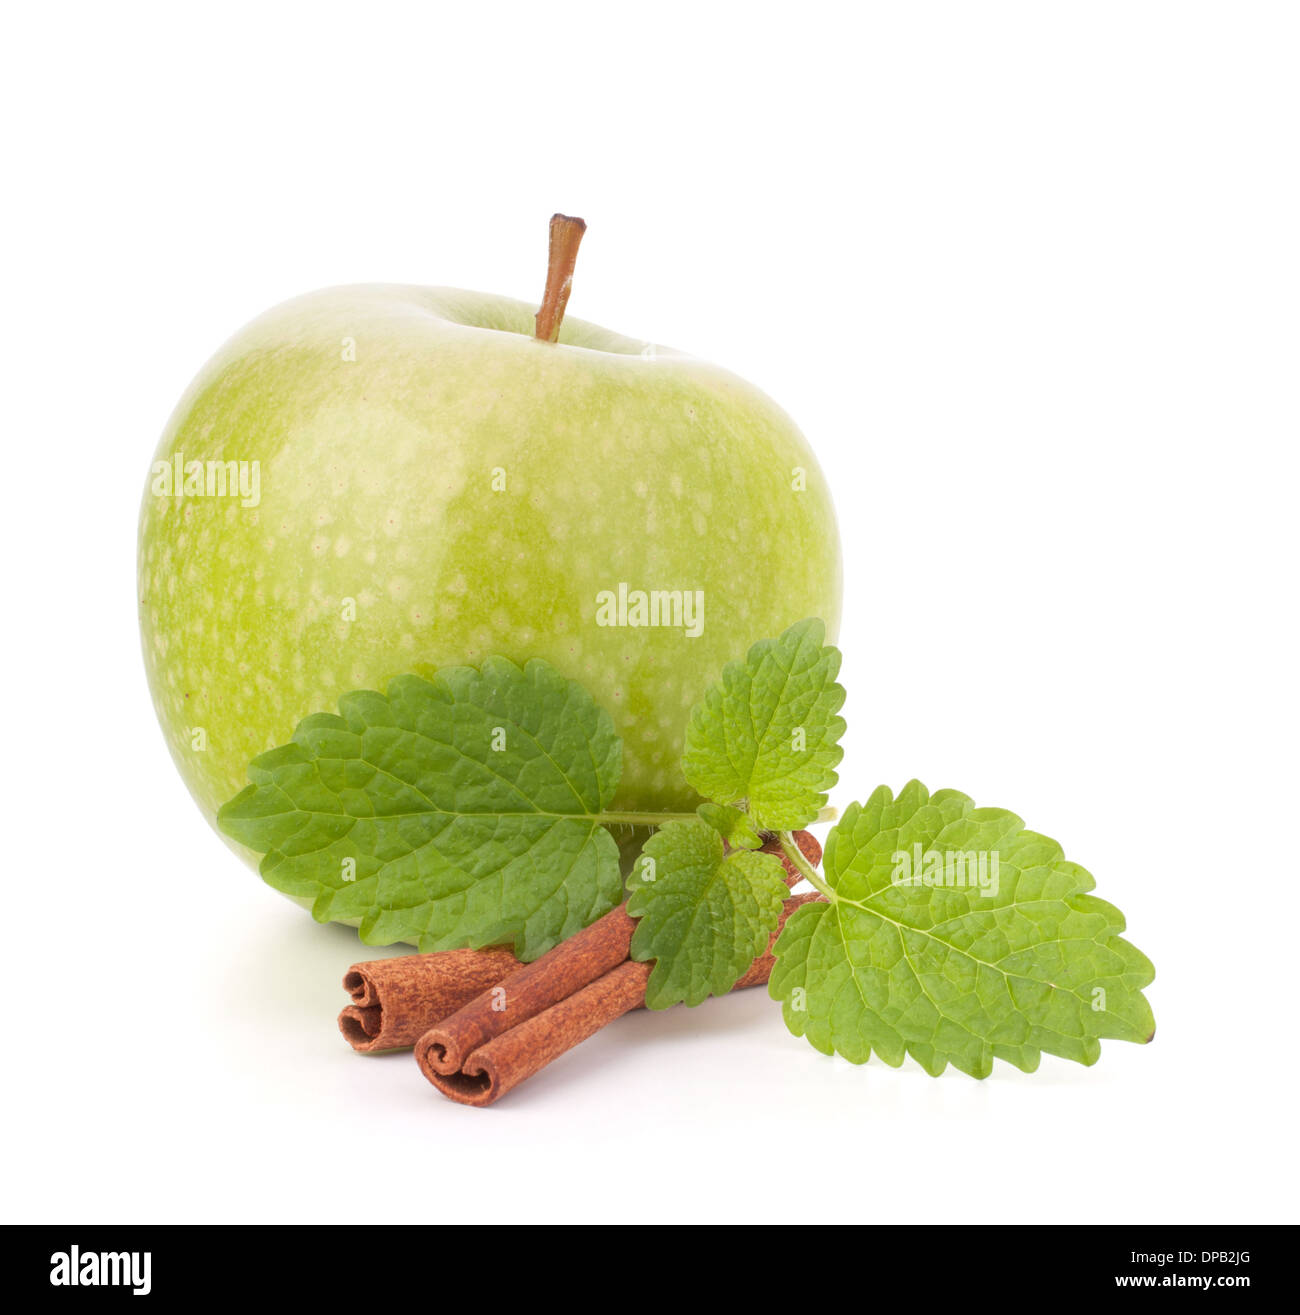 Green apple, cinnamon sticks and mint leaves still life isolated on white cutout. Stock Photo